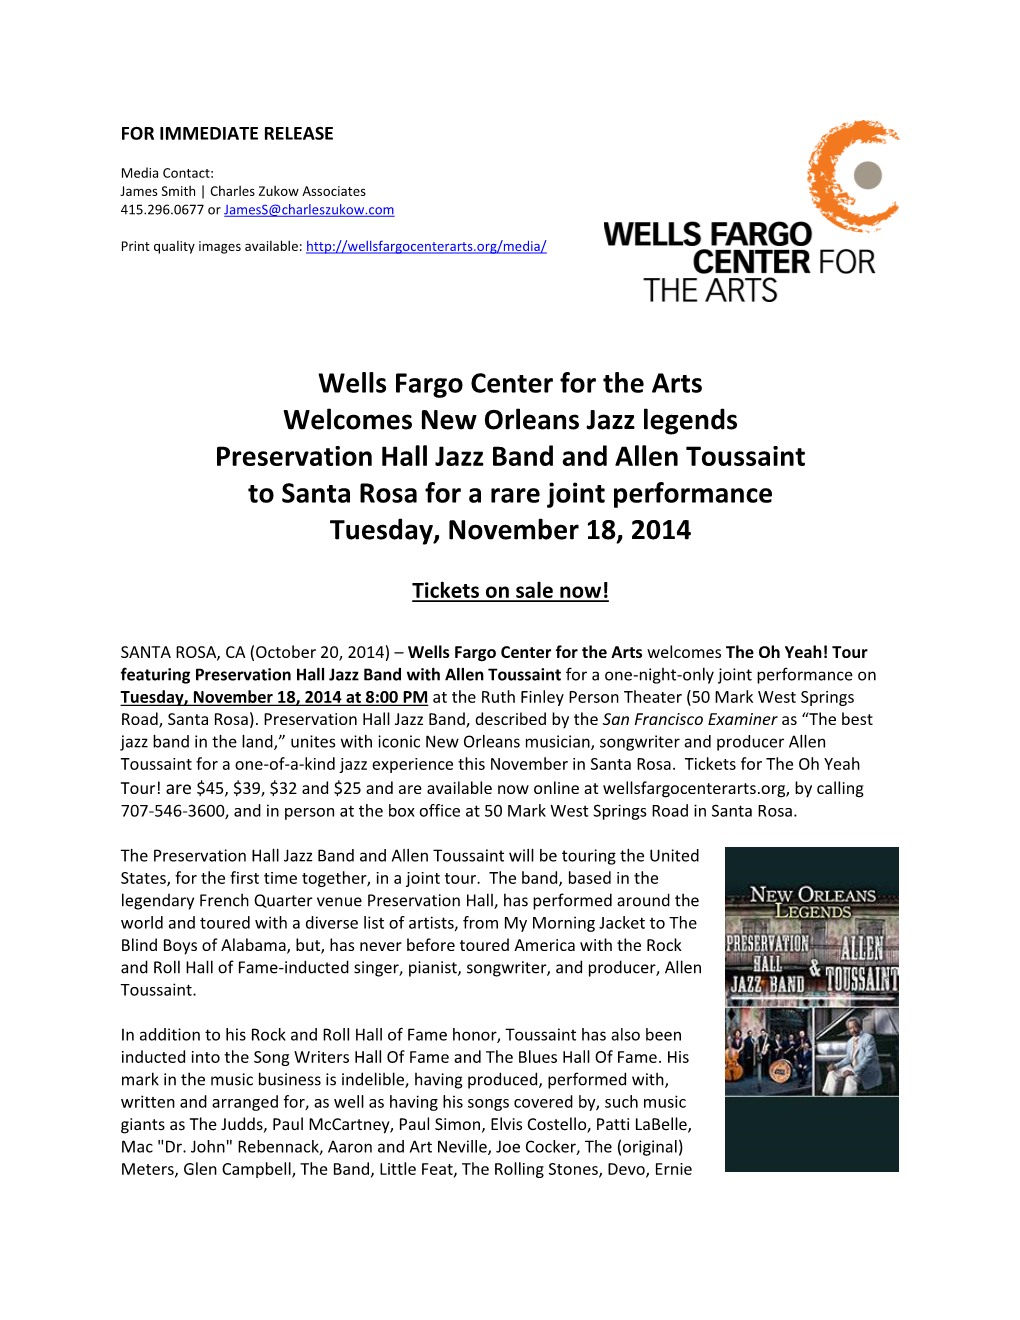 Wells Fargo Center for the Arts Welcomes New Orleans Jazz